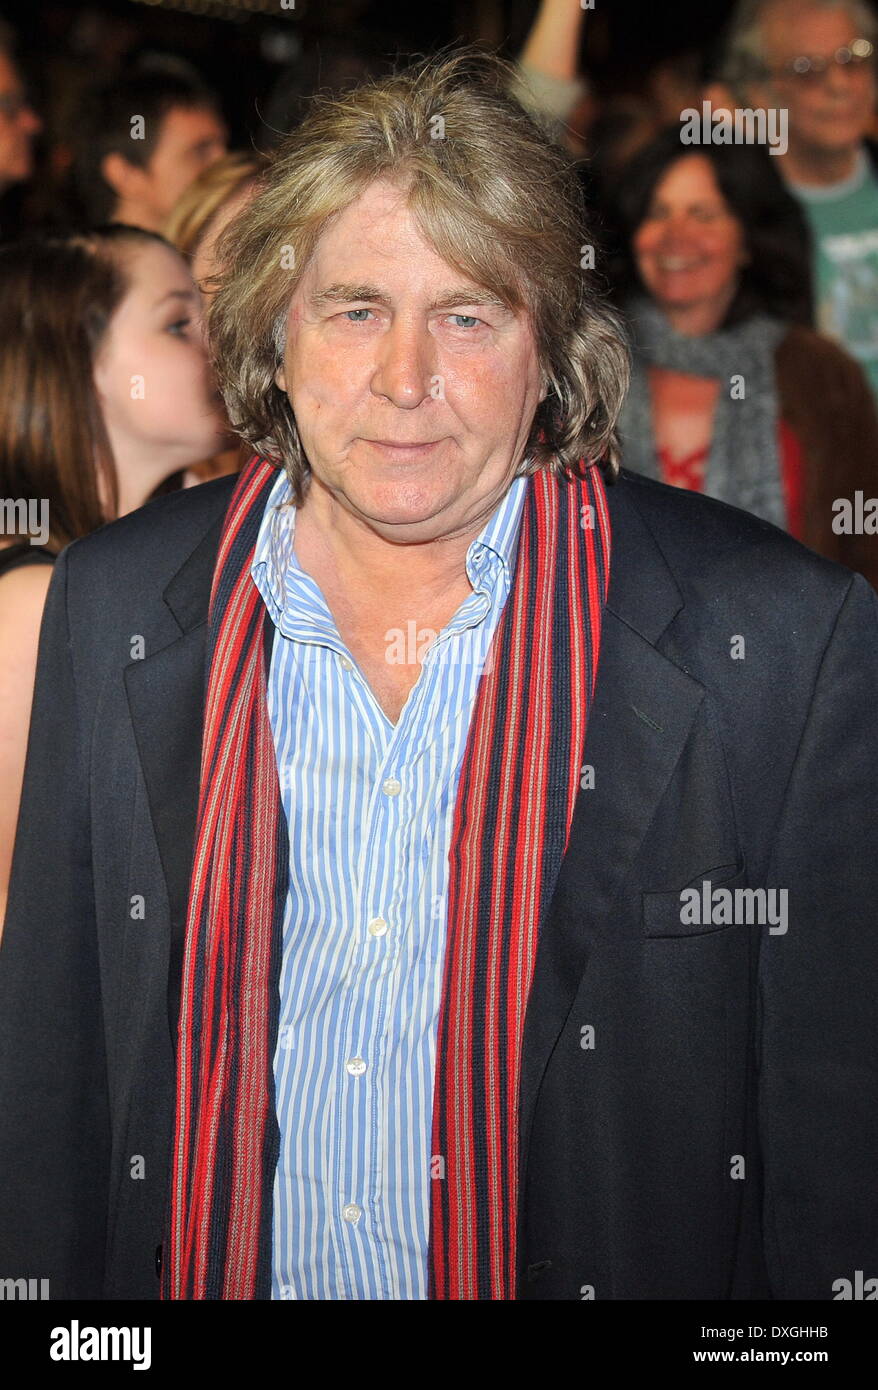 Mick Taylor 56th BFI London Film Festival: 'Rolling Stones - Crossfire Hurricanes', gala screening held at the Odeon Leicester Square - Arrivals. London, England - 18.10.12 Featuring: Mick Taylor Where: London, United Kingdom When: 18 Oct 2012 Stock Photo